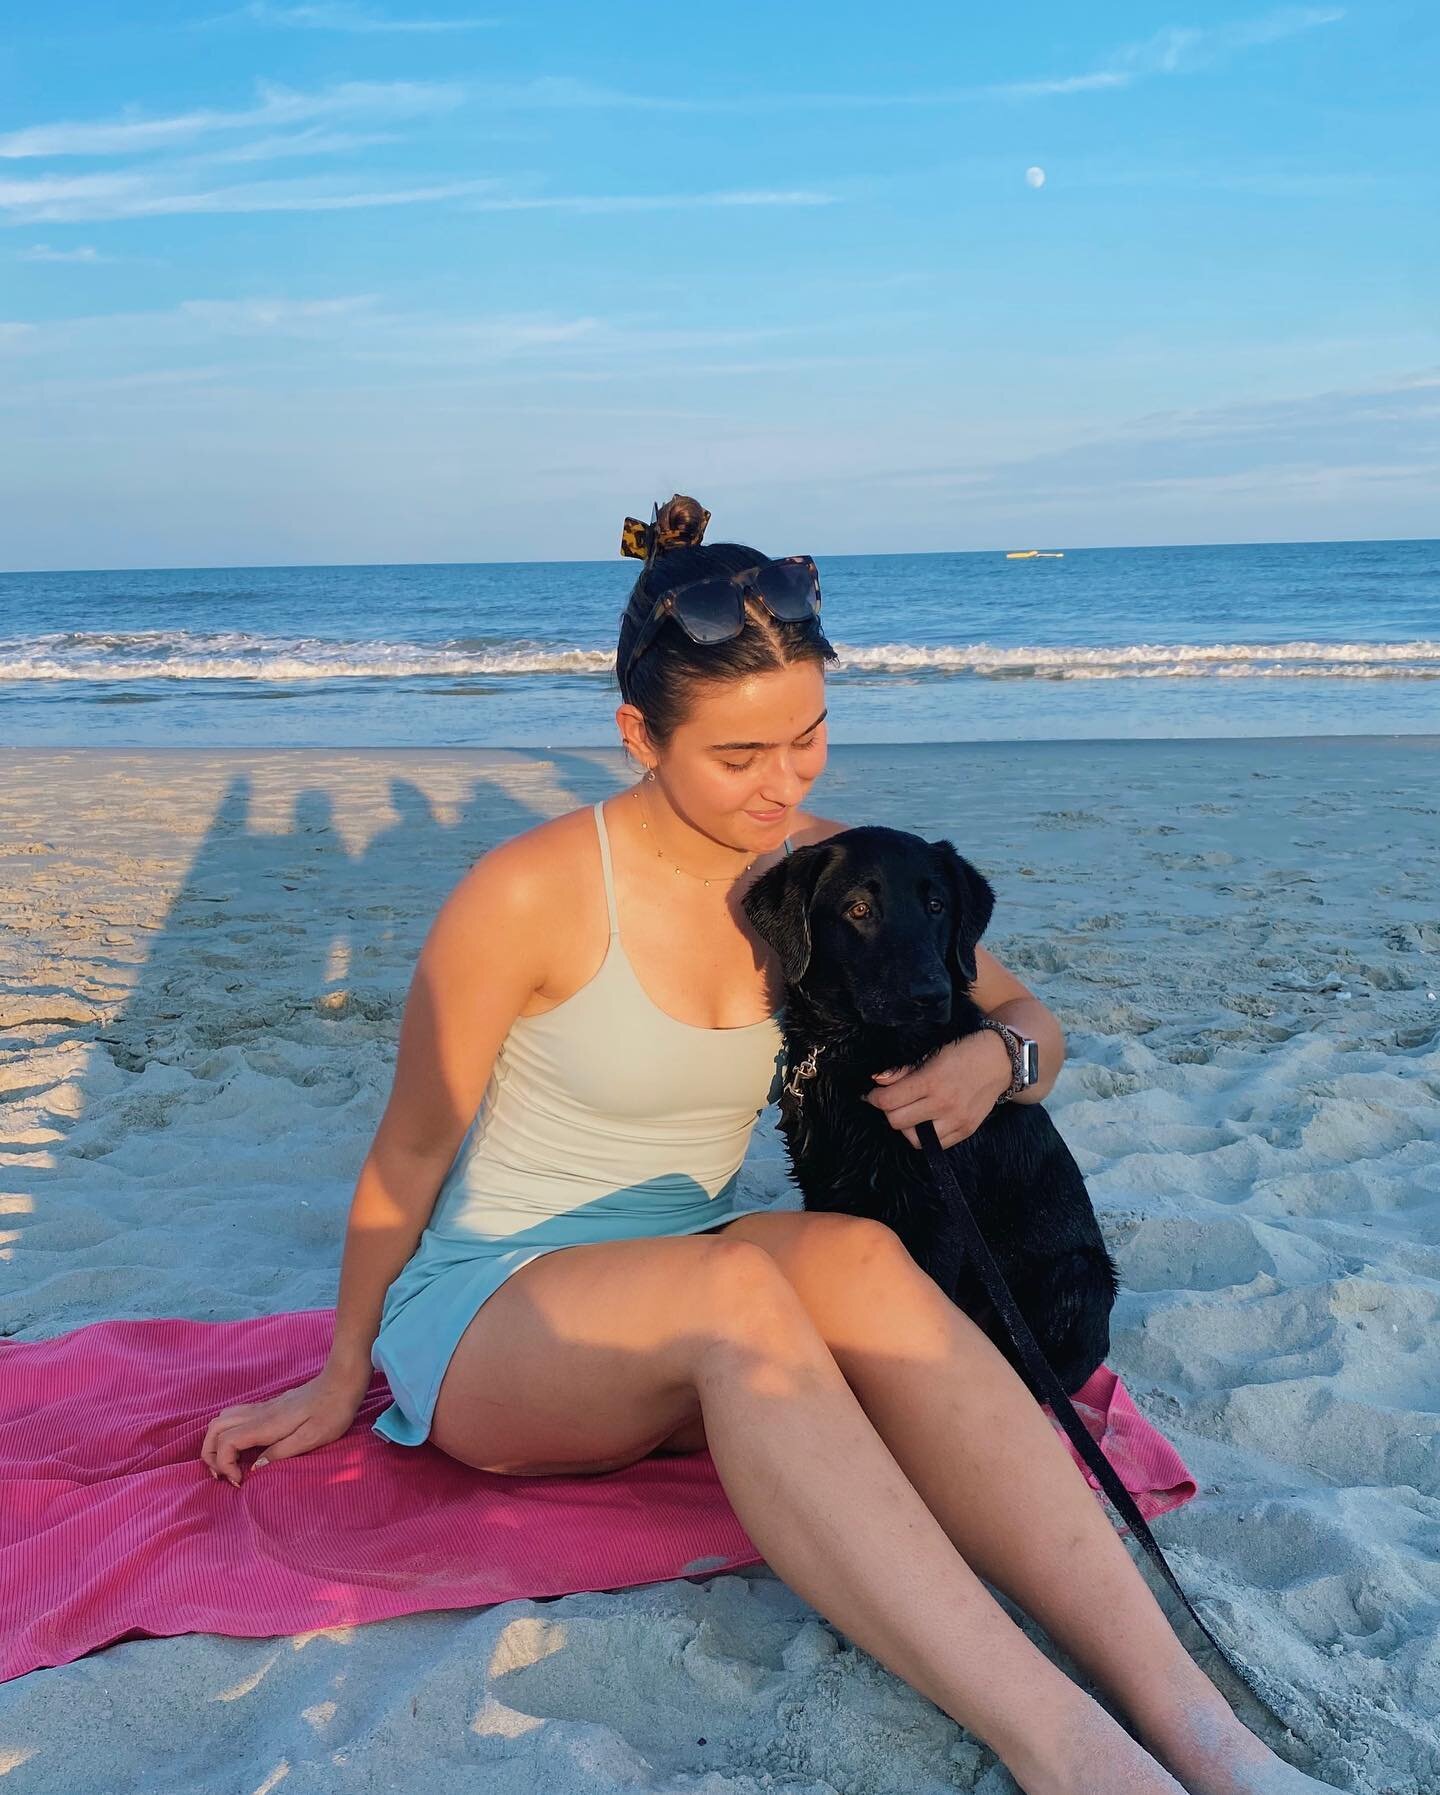 winnies first trip to the beach was a success 🌊🐶

I love seeing the world through her eyes and watch her experience things for the first time being a dog mom is so fun and rewarding I don&rsquo;t know what I would do without this little sweetheart?